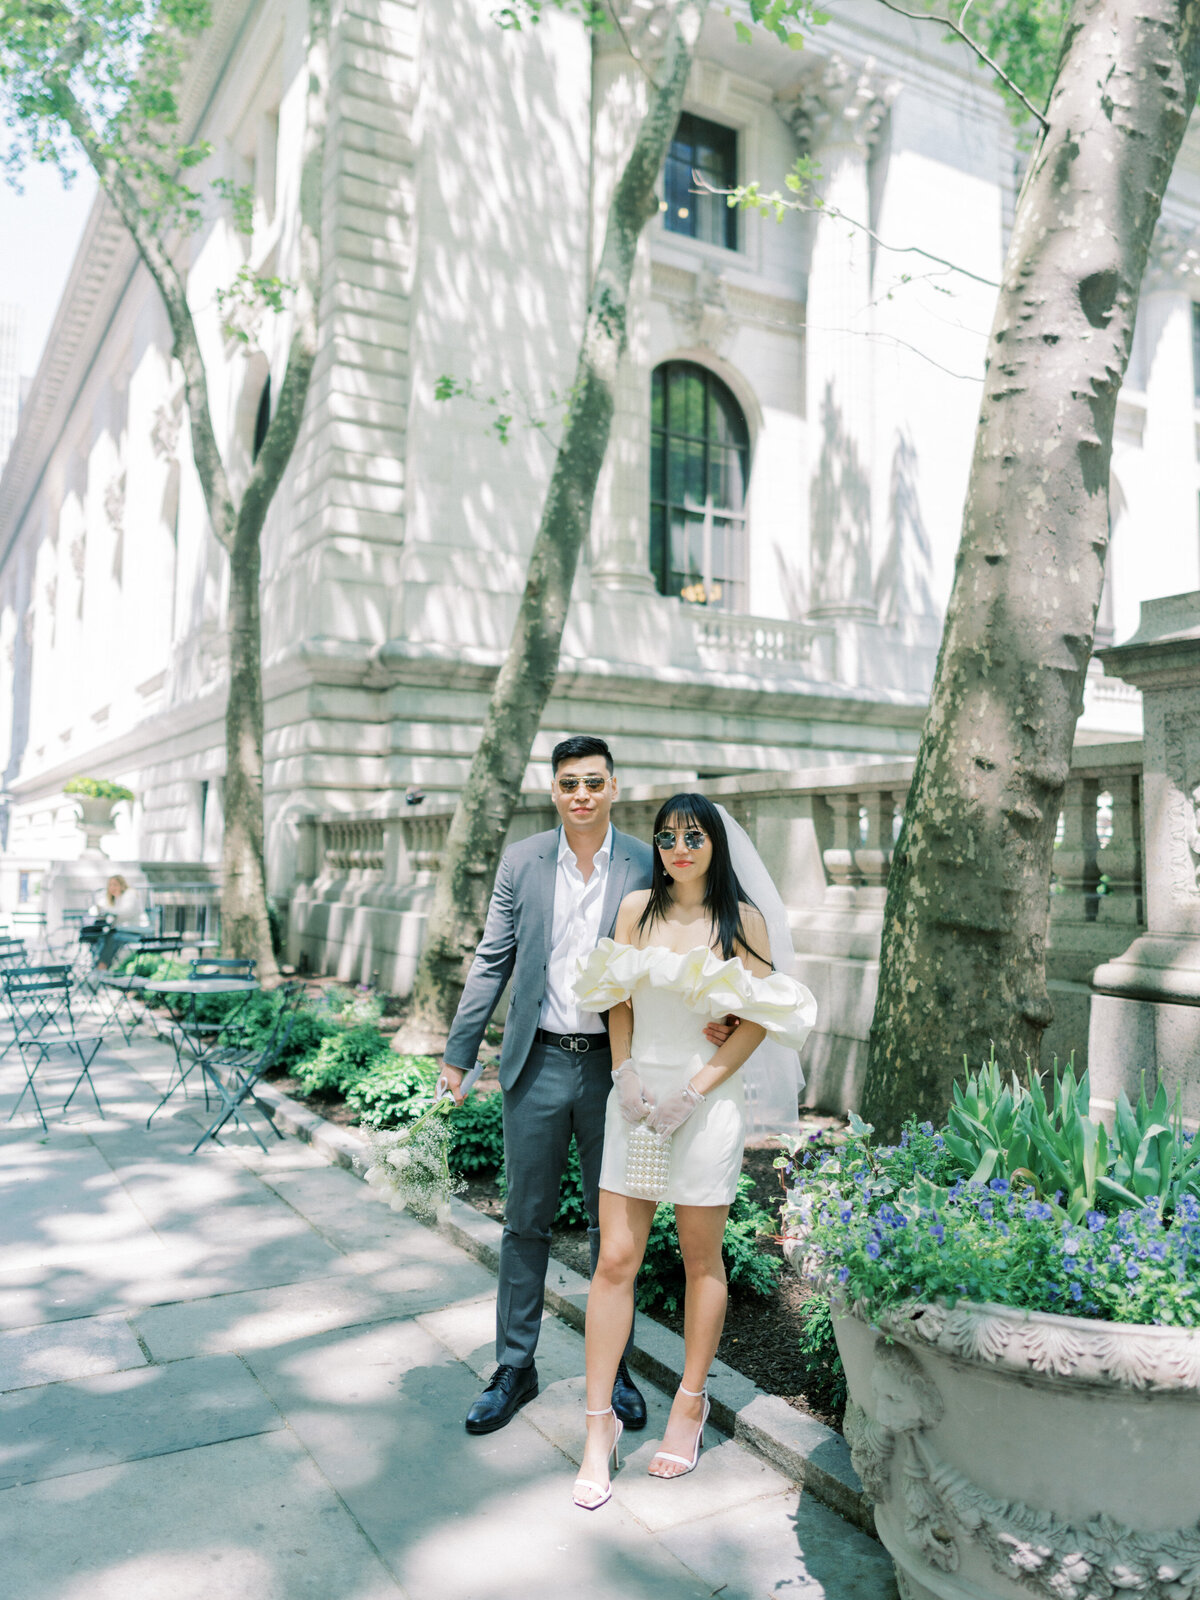 Vogue Editiorial NYC Elopement Themed Engagement Session Highlights | Amarachi Ikeji Photography 37